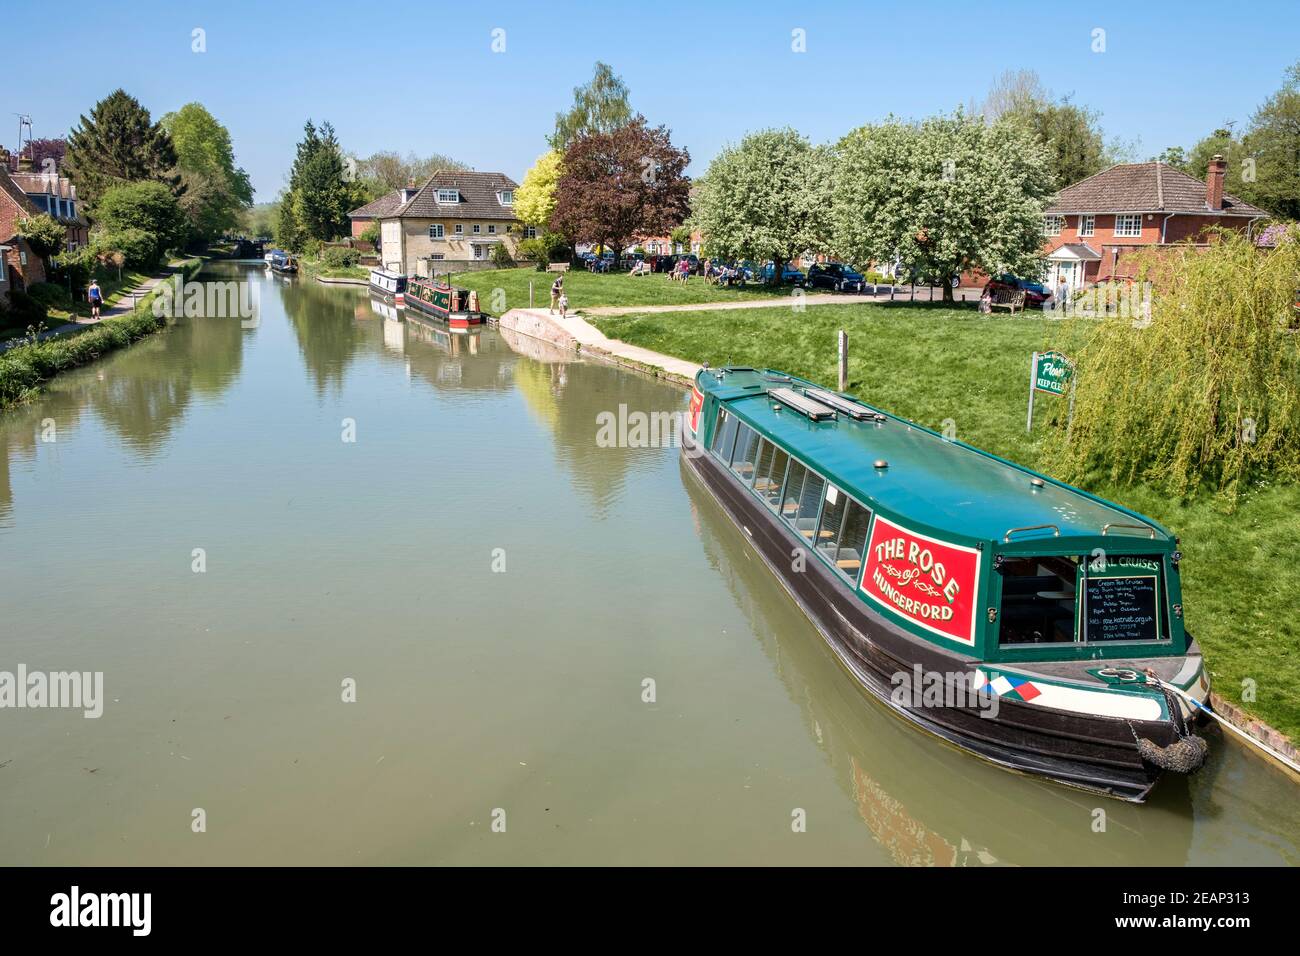 Canal boats at Hungerford Wharf, Hungerford, Berkshire, England, GB, UK Stock Photo